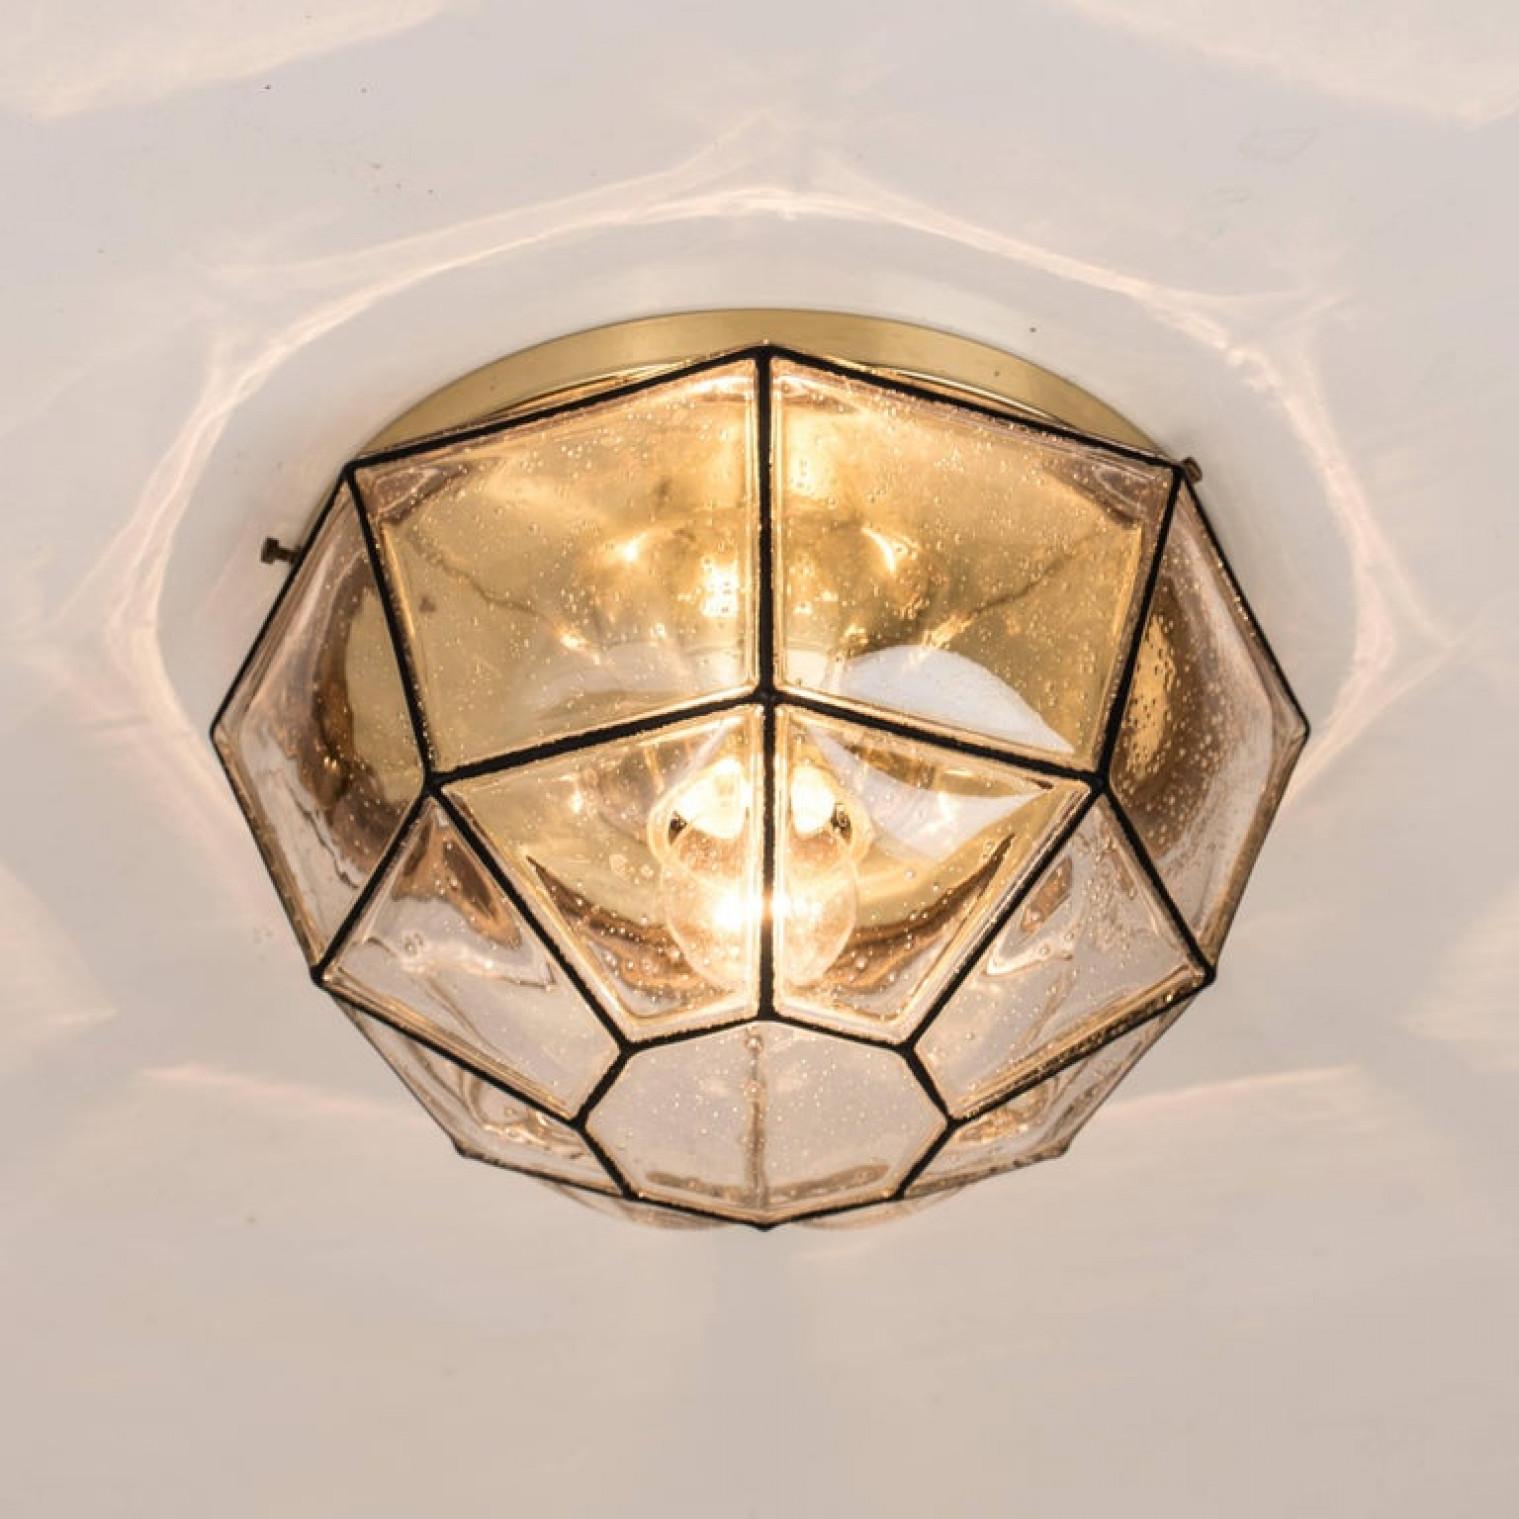 This beautiful and unique octagonal set of glass light flush mounts or wall lights were manufactured by Glashütte Limburg in Germany during the 1960s (late 1960s or early 1970s). Nice craftsmanship. Elaborate clear bubble glass which bulges slightly